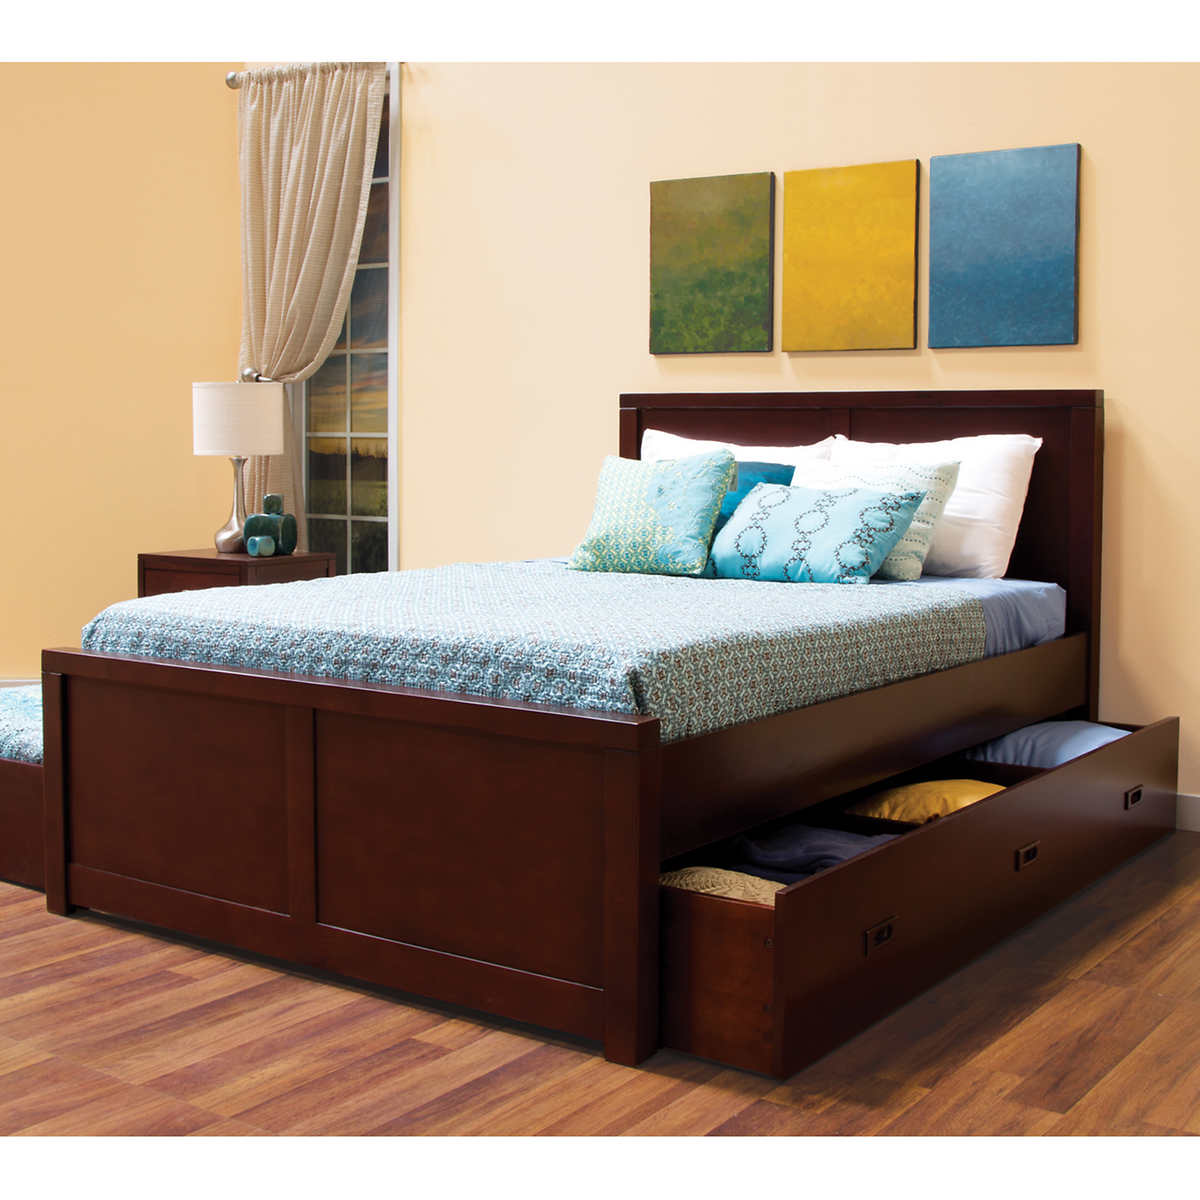 Peyton Full Bed With Trundle And, King Size Bed Frame With Storage Costco